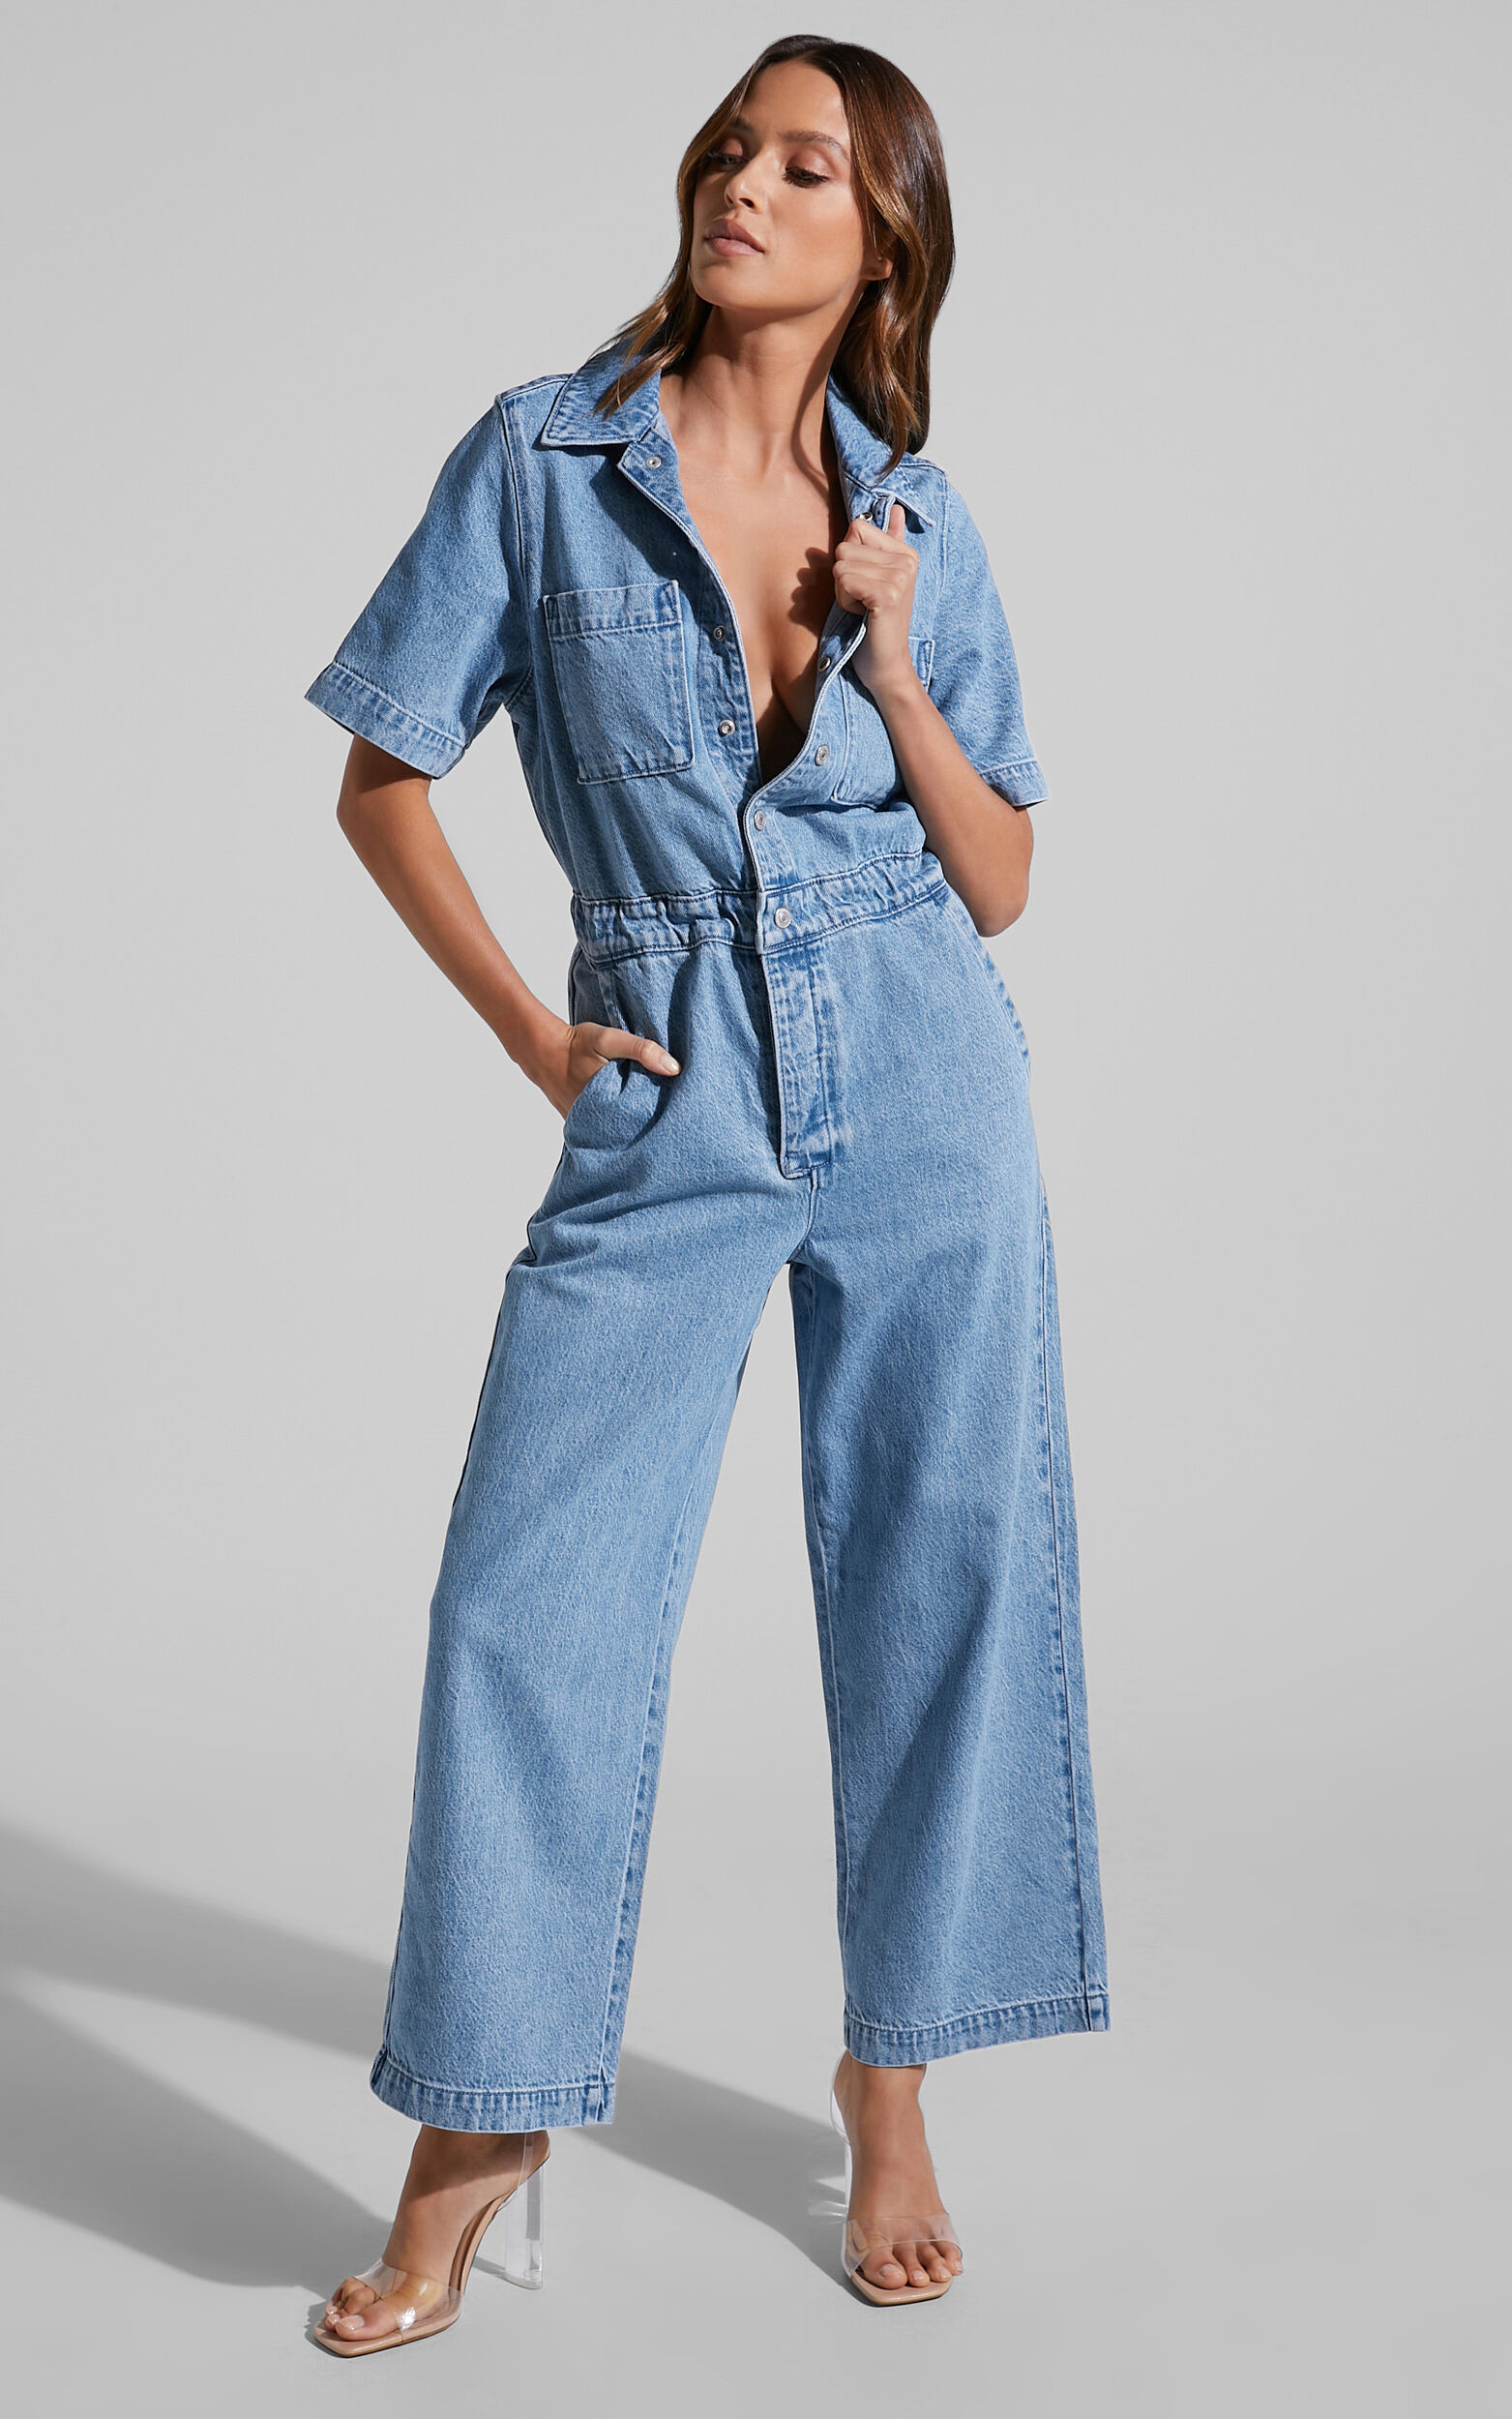 Levi's - SS BOILERSUIT in More Money More Problems - XS, BLU1